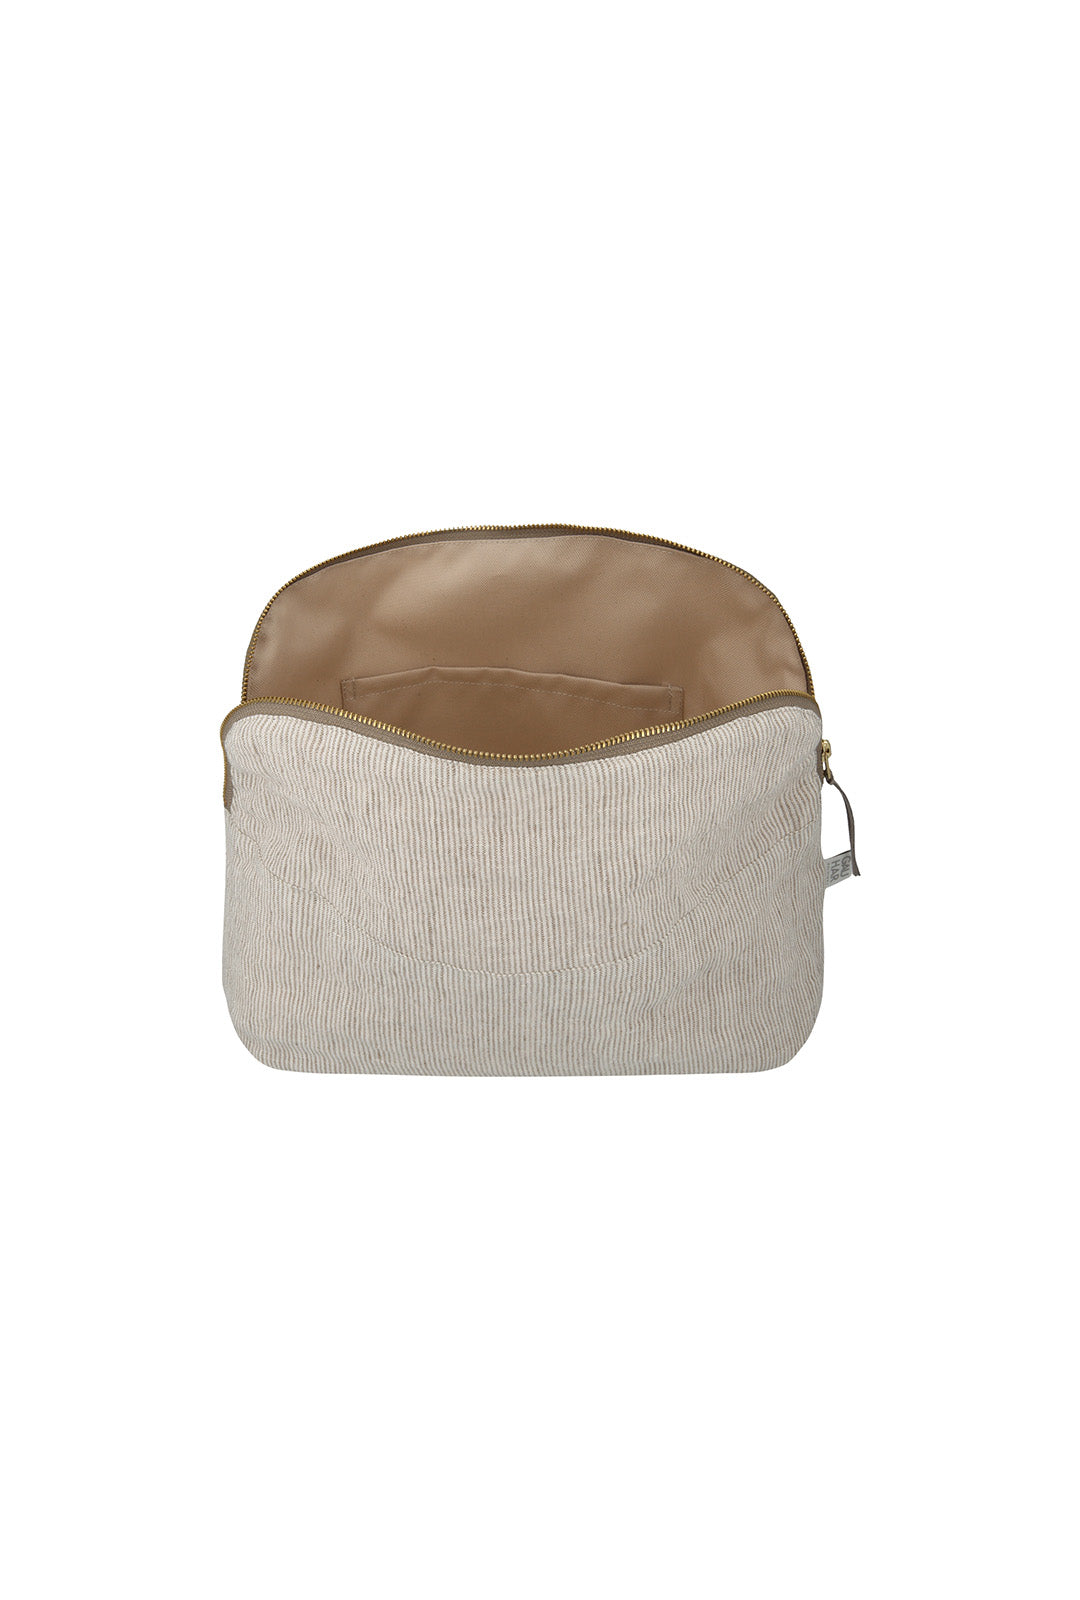 COSMETIC BAG LINEN STRIPED BEIGE SMALL